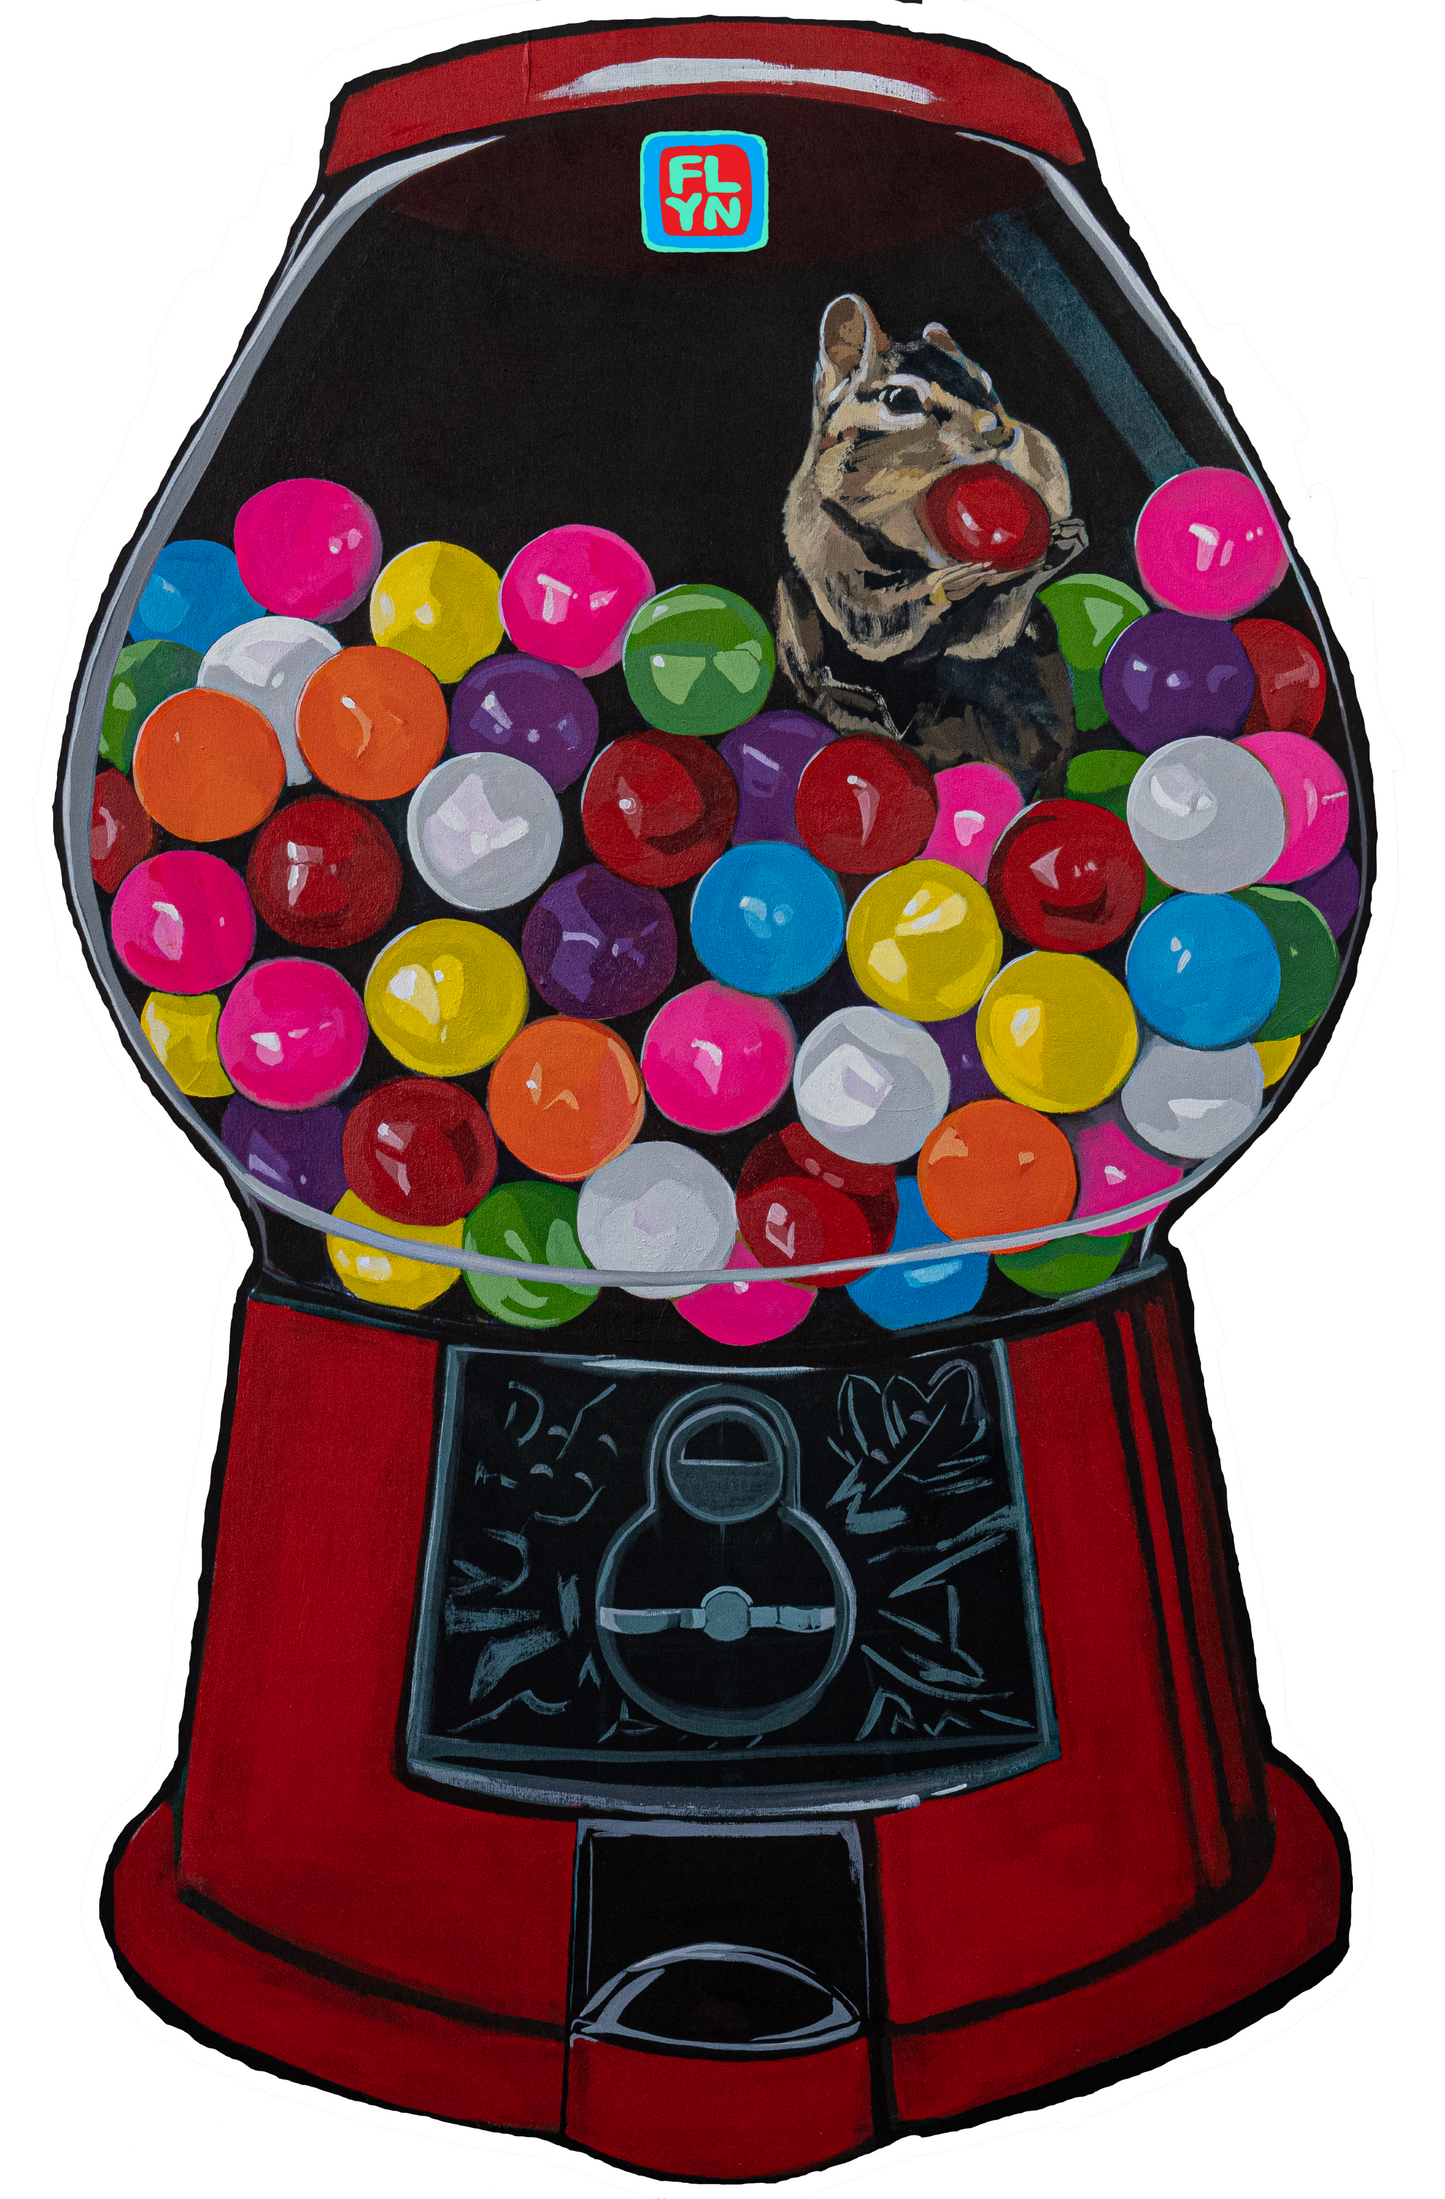 I'm in Guys! Gumball Machine Sticker Stickers FlynHats 3"x2"  